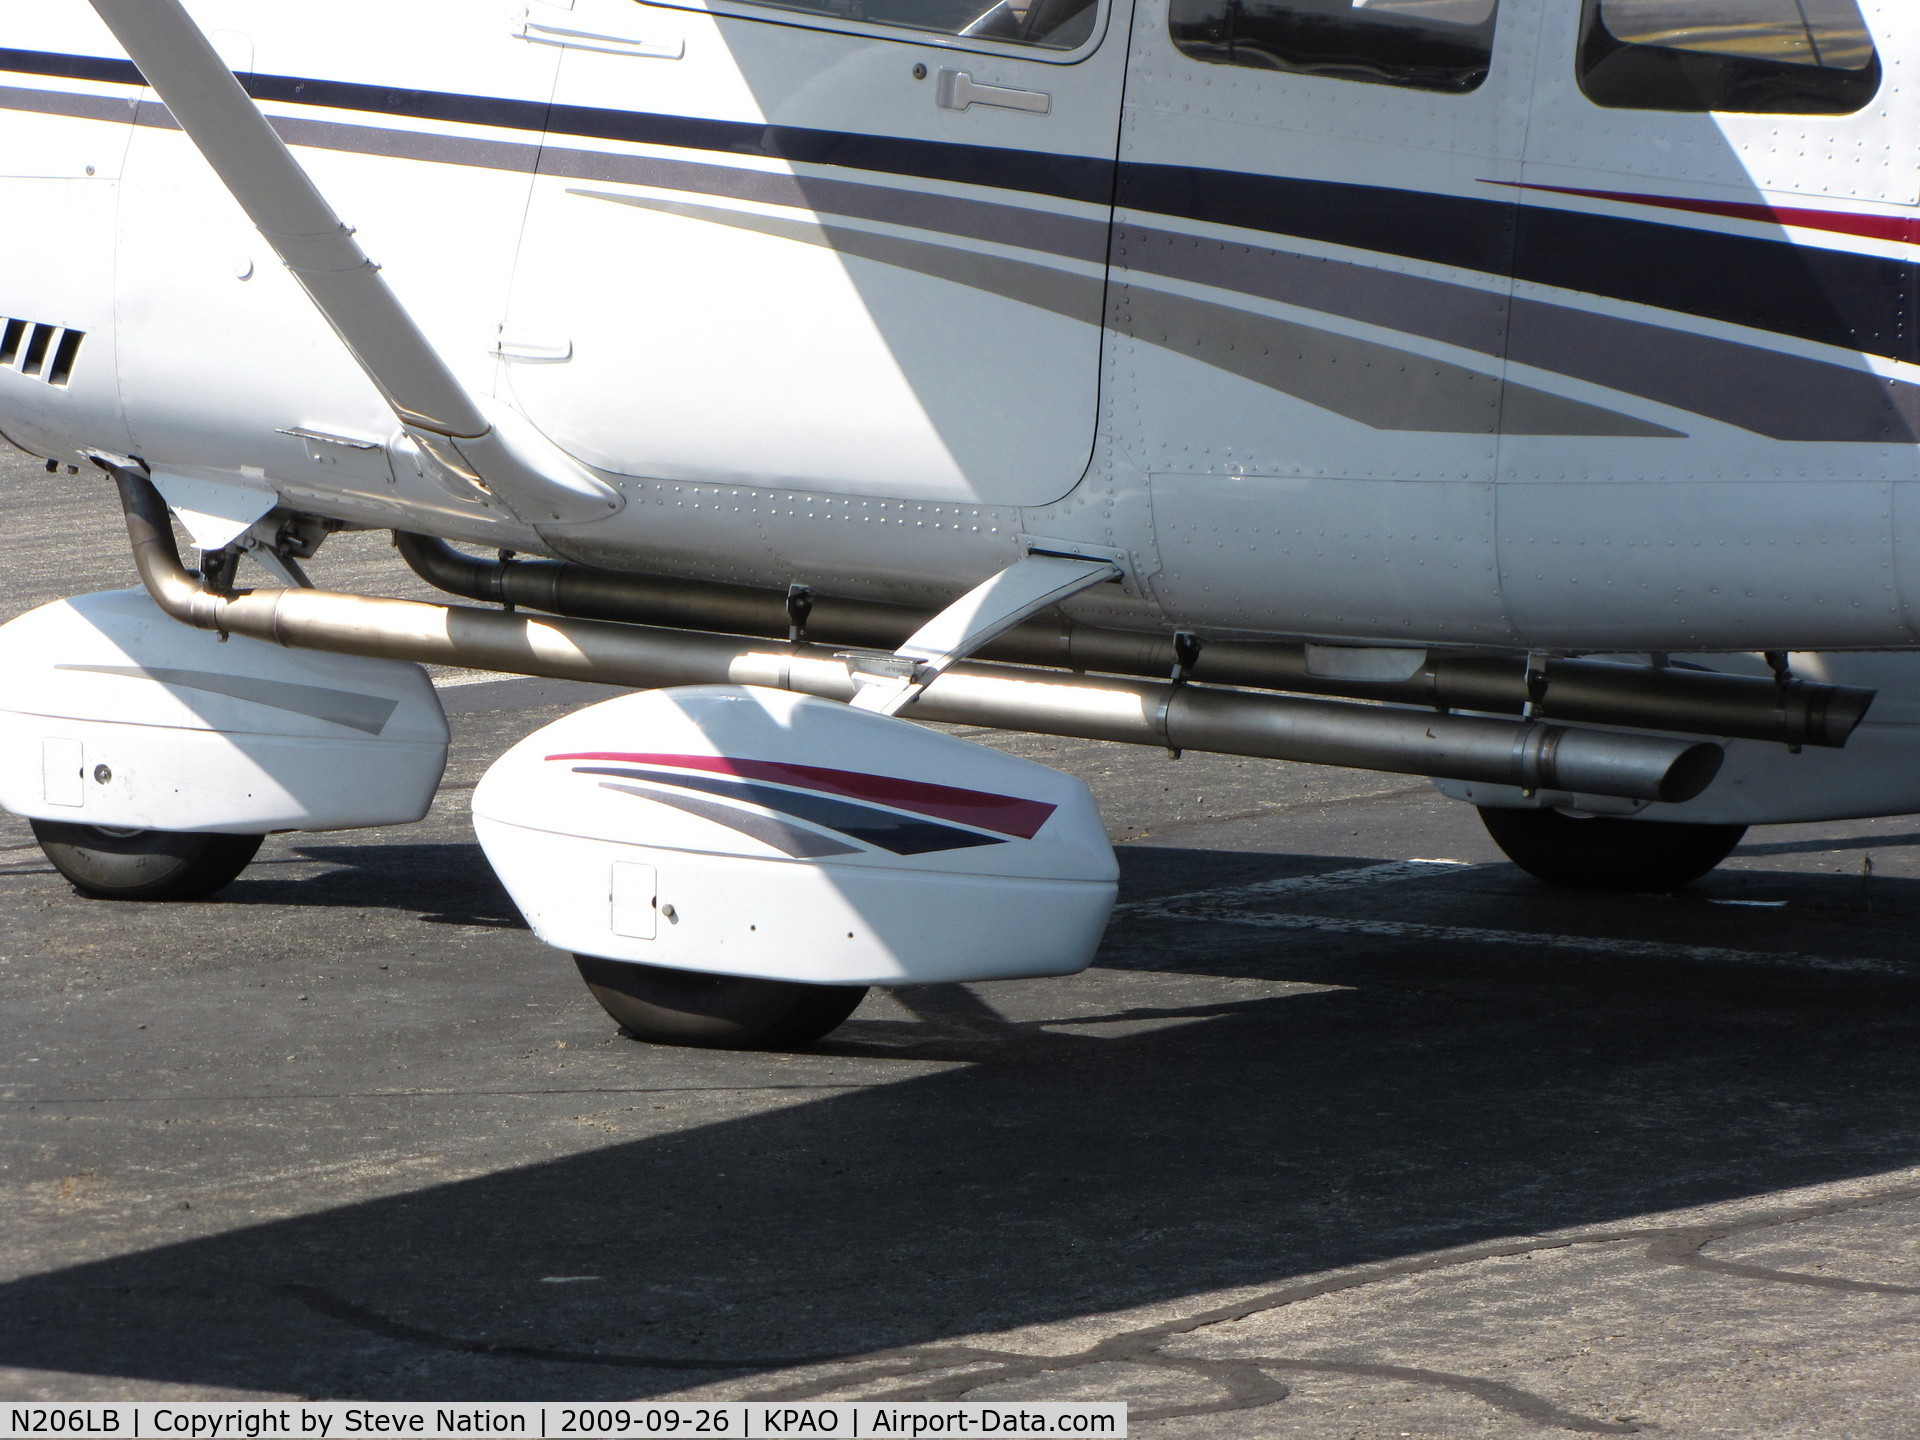 N206LB, 1999 Cessna 206H Stationair C/N 20608055, Cessna 206H (close-up extended exhaust pipe)